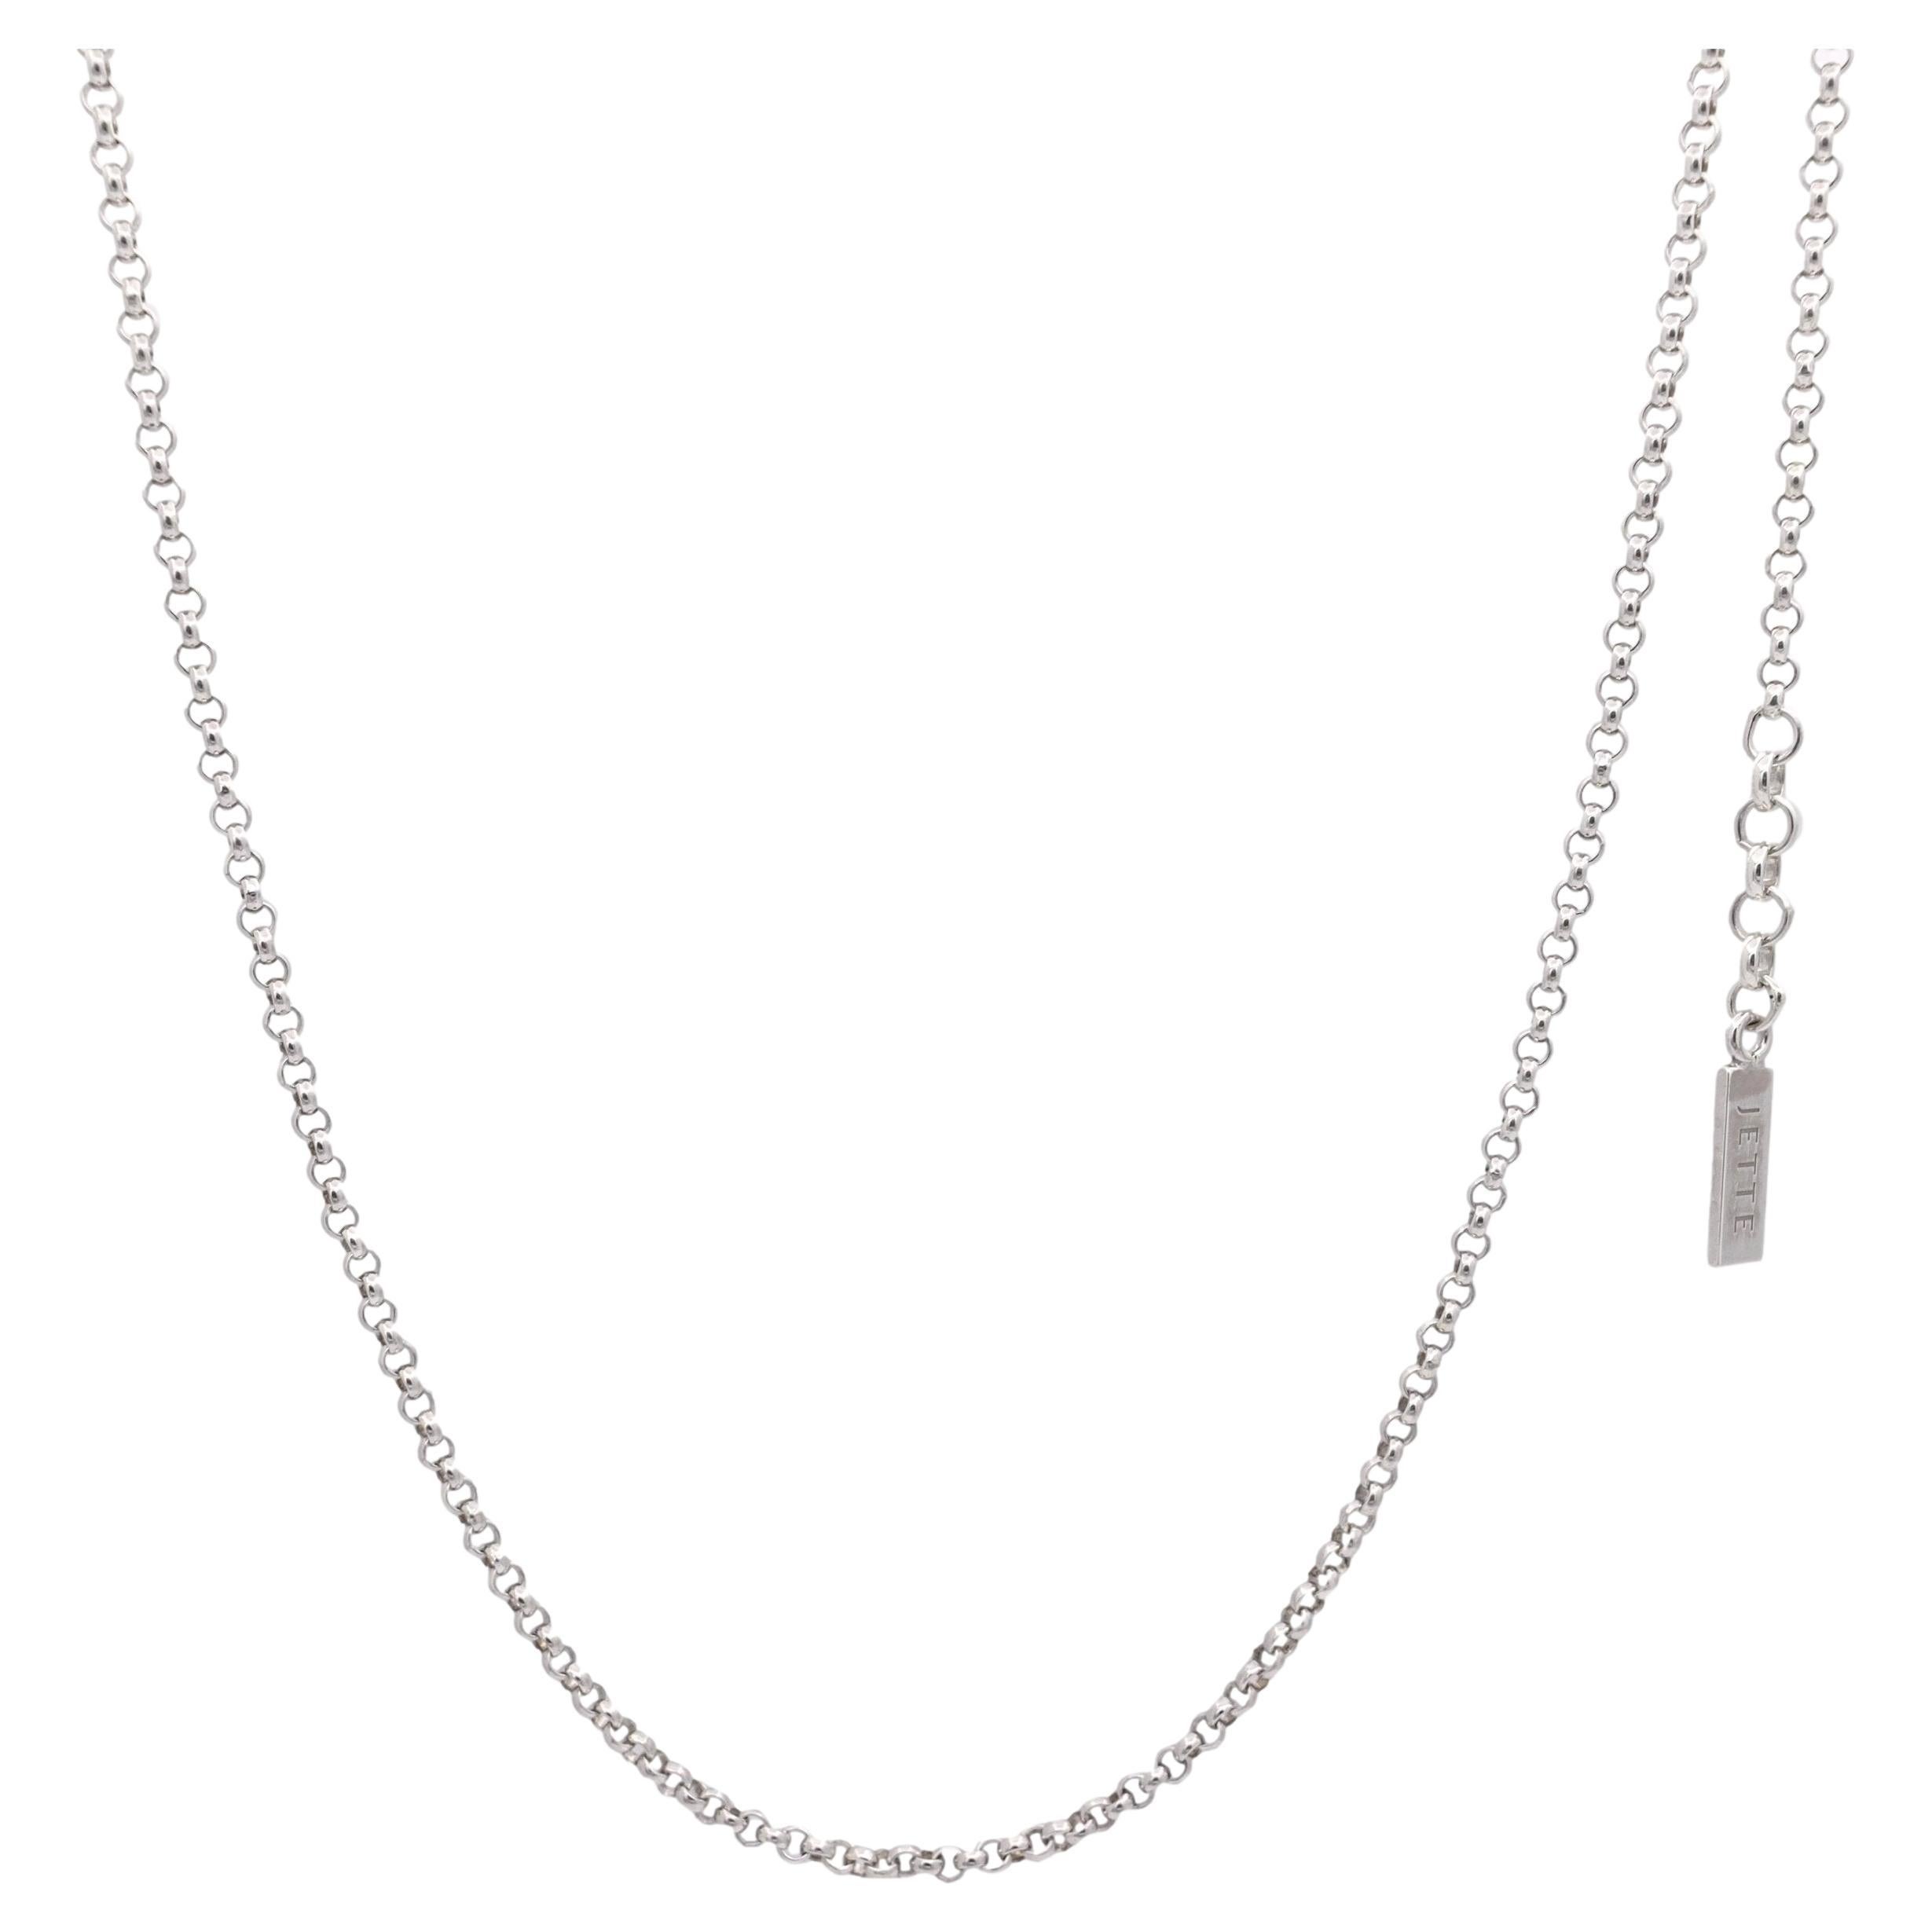 JETTE Sterling Silver 2.5mm round Link 36" Long Chain Necklace